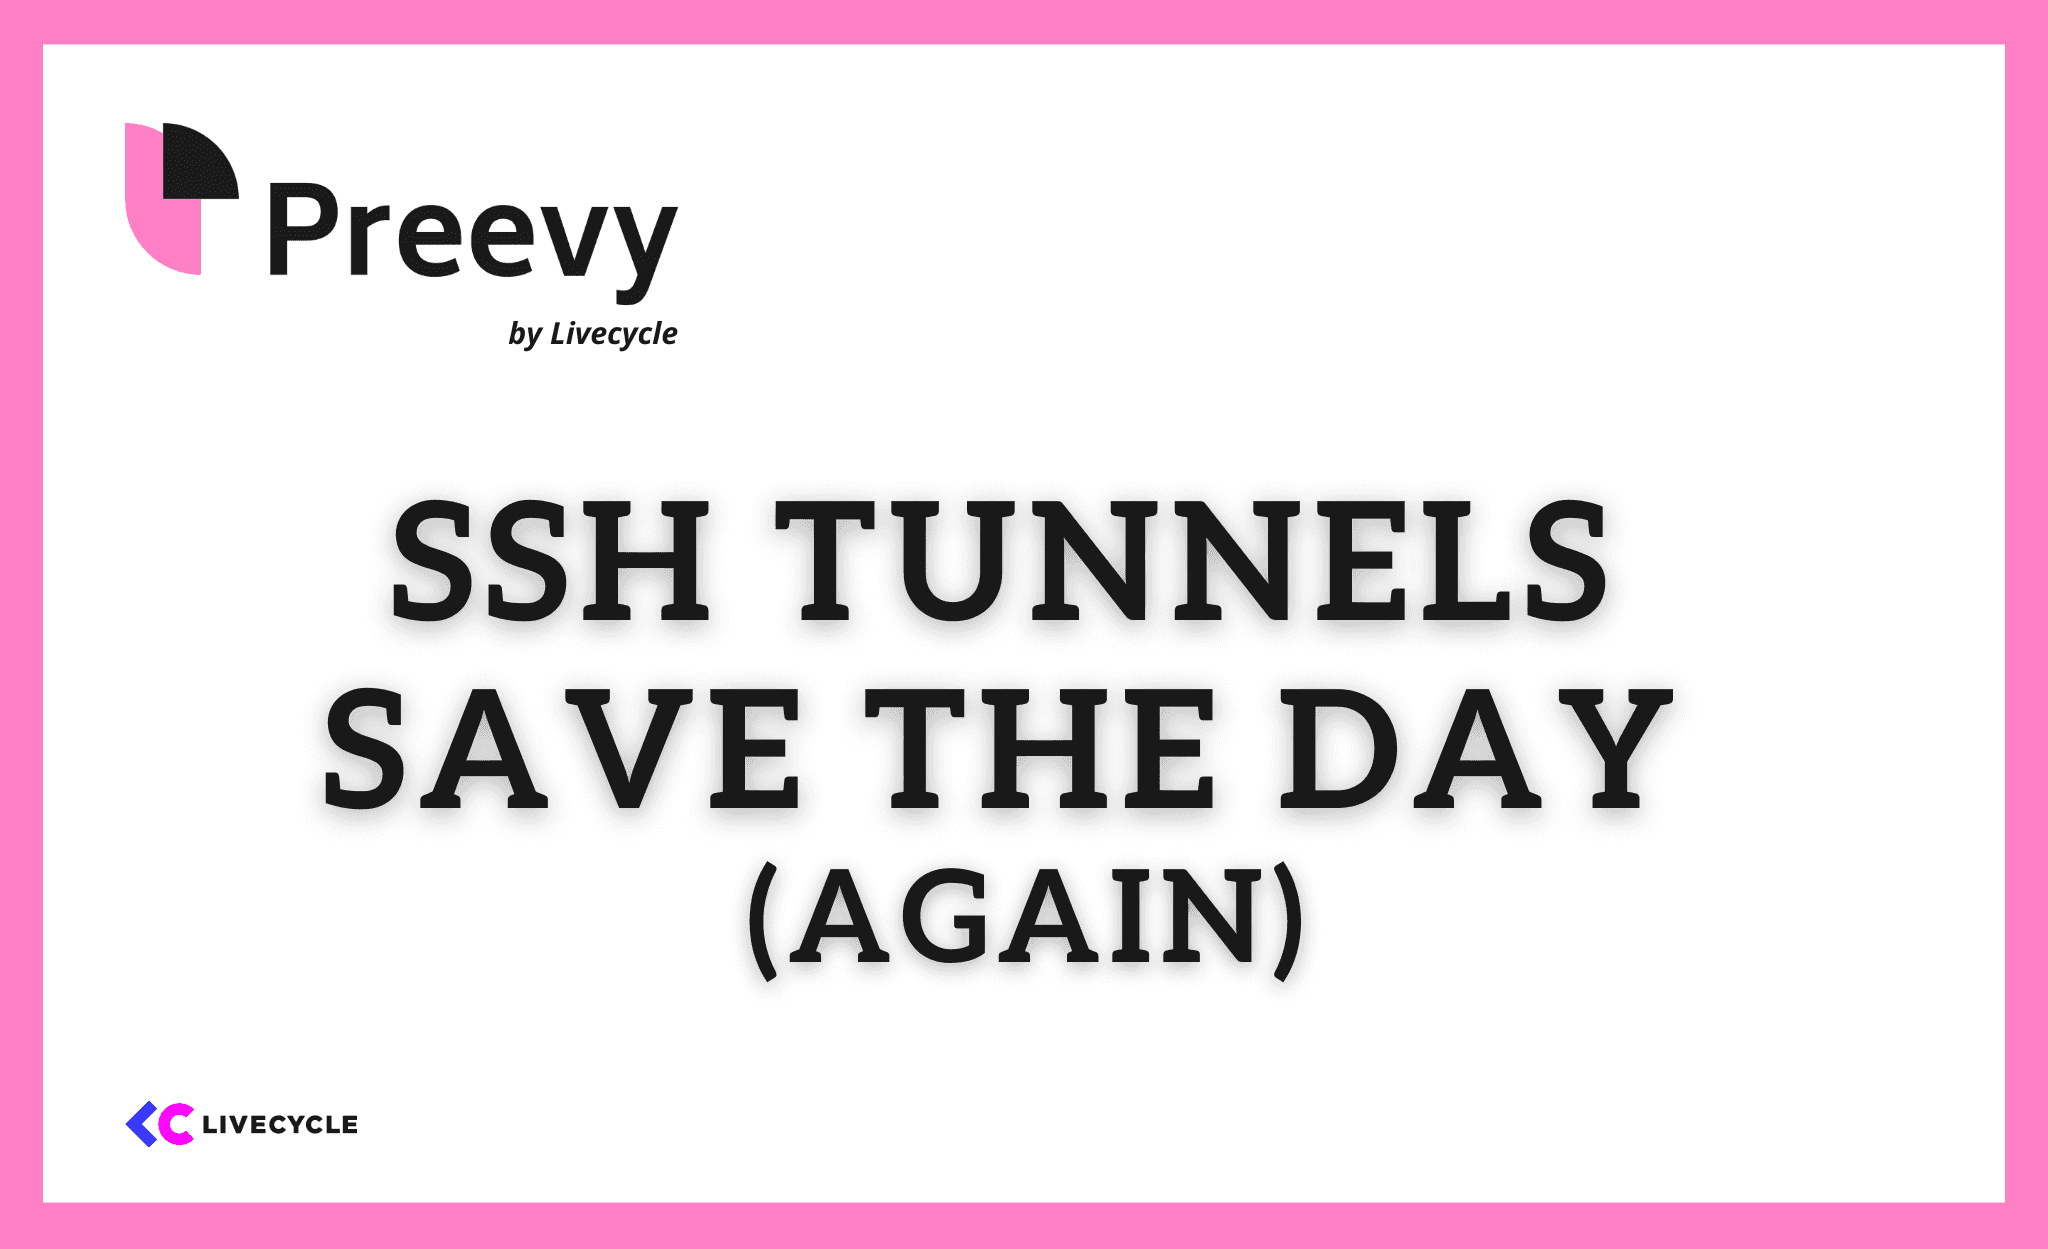 SSH tunnels save the day (again)